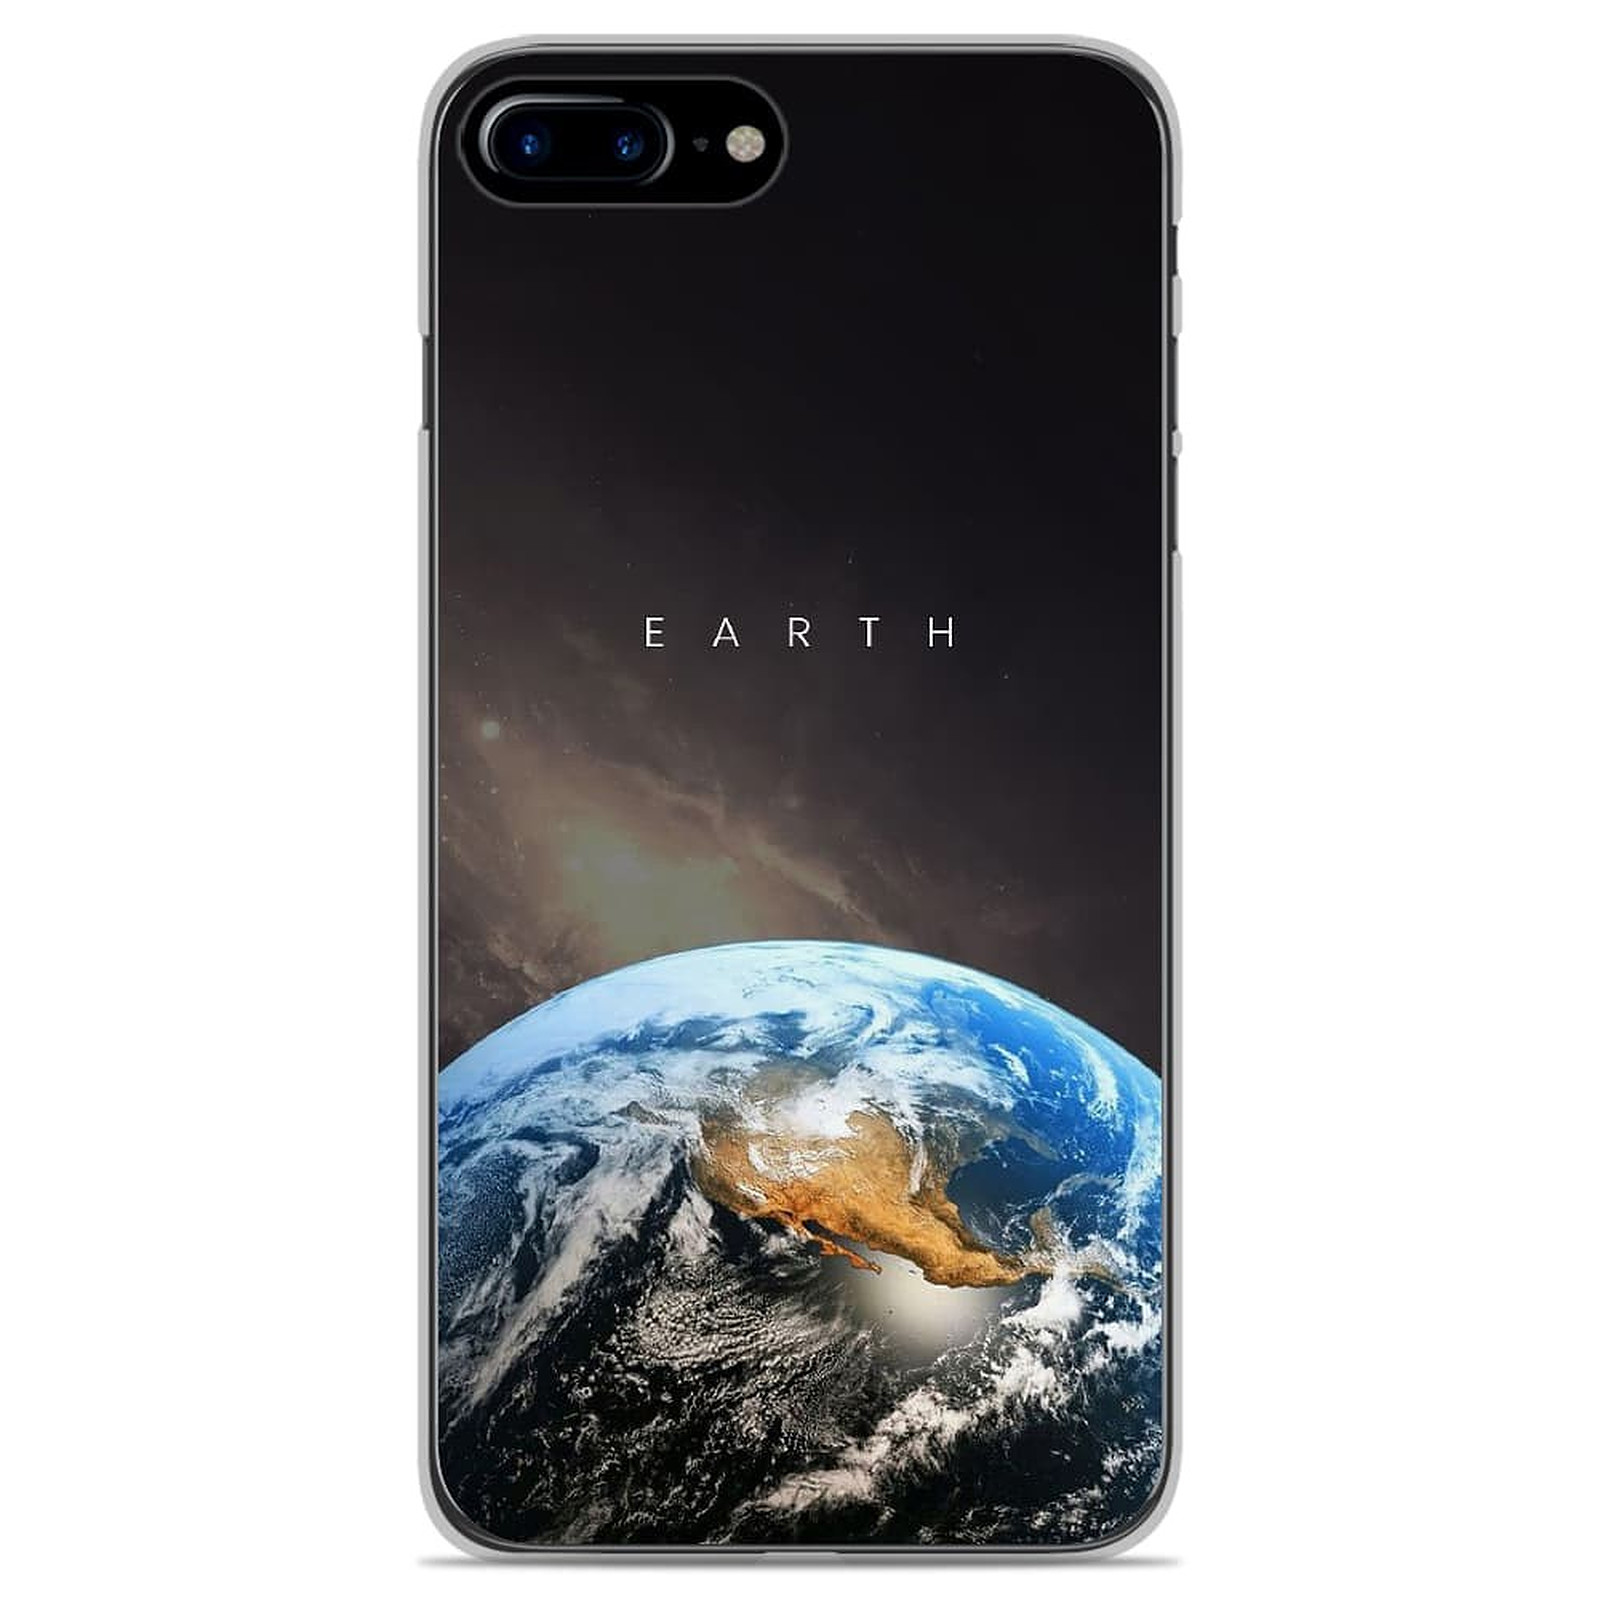 1001 Coques Coque silicone gel Apple iPhone 7 Plus motif Earth - Coque telephone 1001Coques